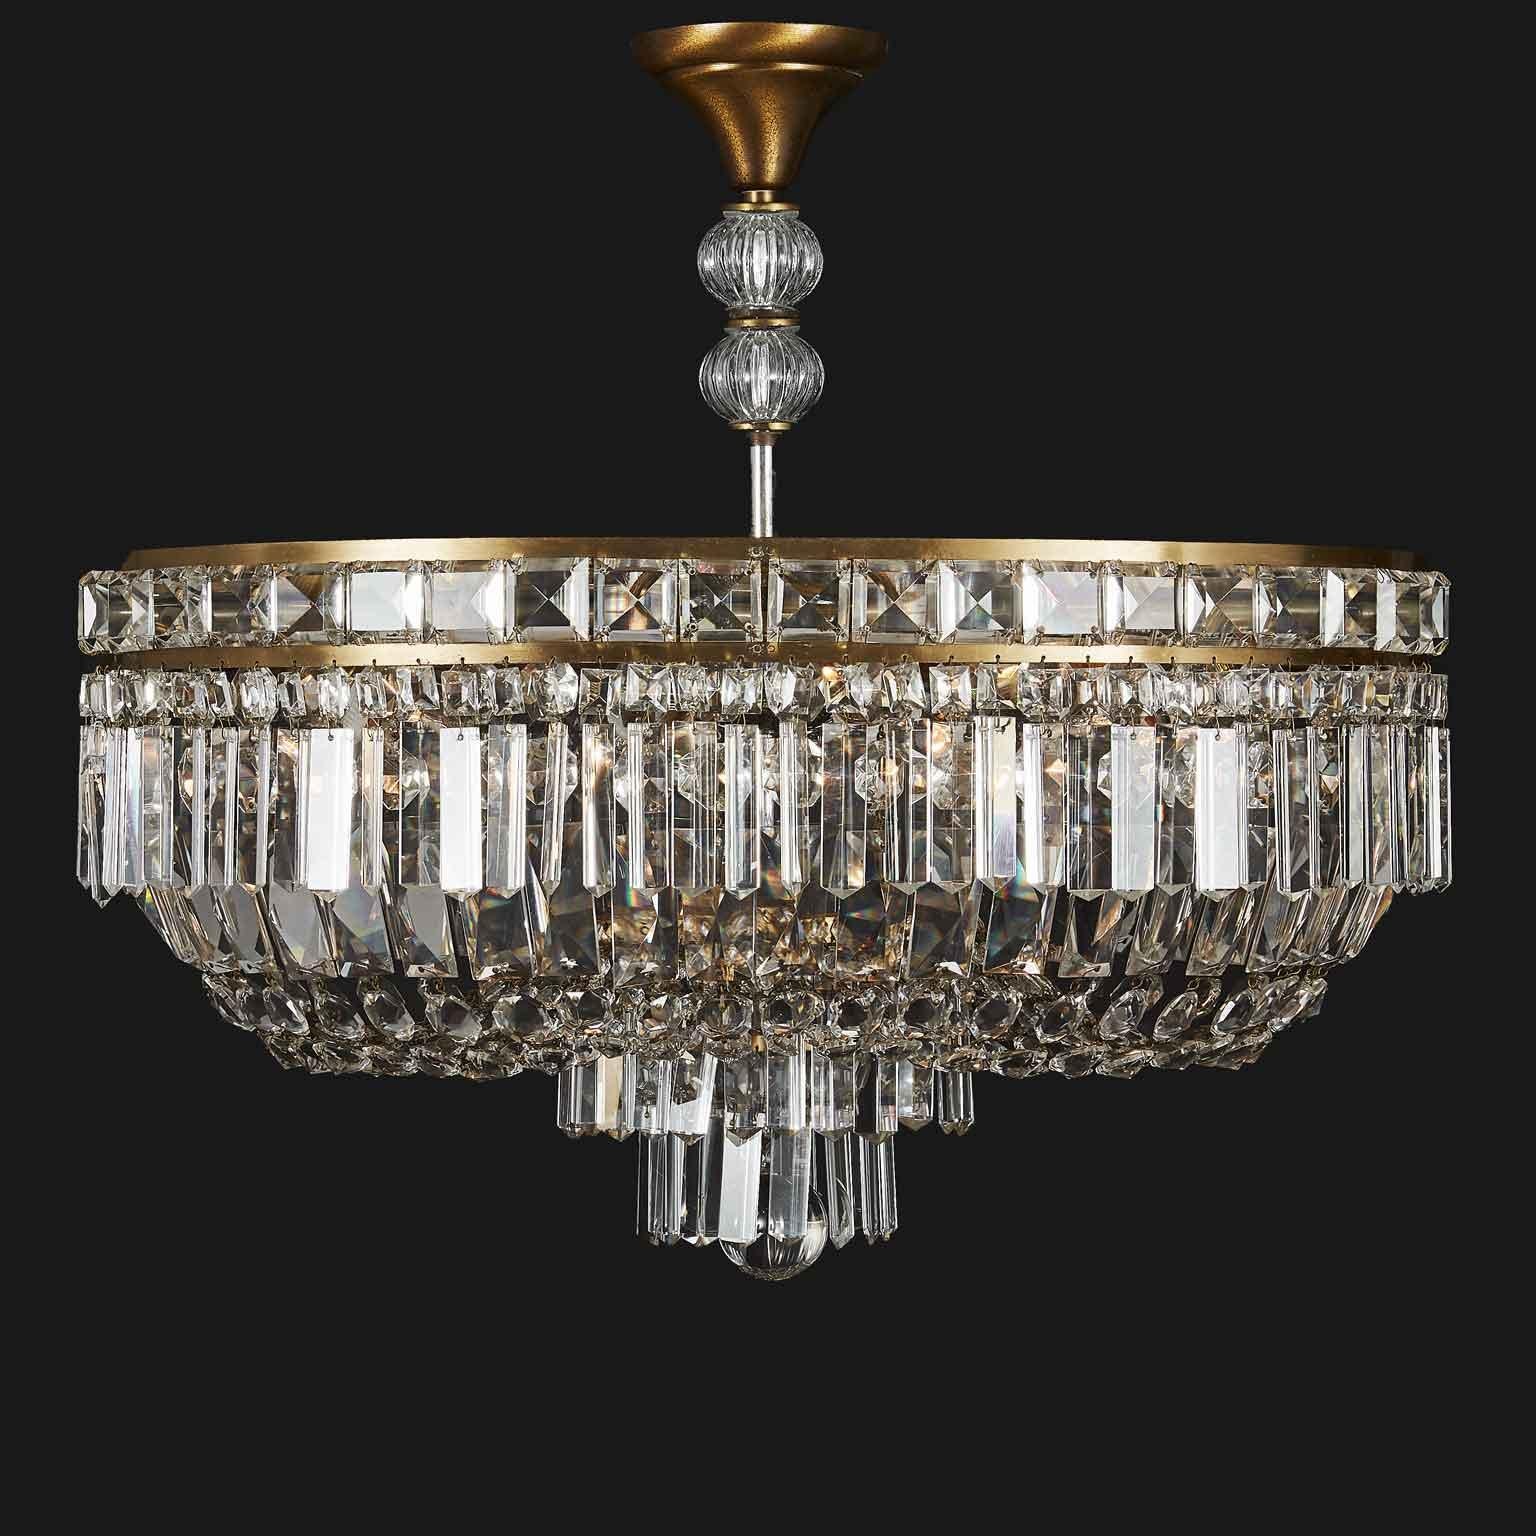 Italian crystal flush mount ceiling fixture, a timeless oval eight-light ceiling fixture, dating back to late 20th century, coming from an extraordinary elegant Como Lake villa, Northern Italy, in good condition.
New wiring for European standards.